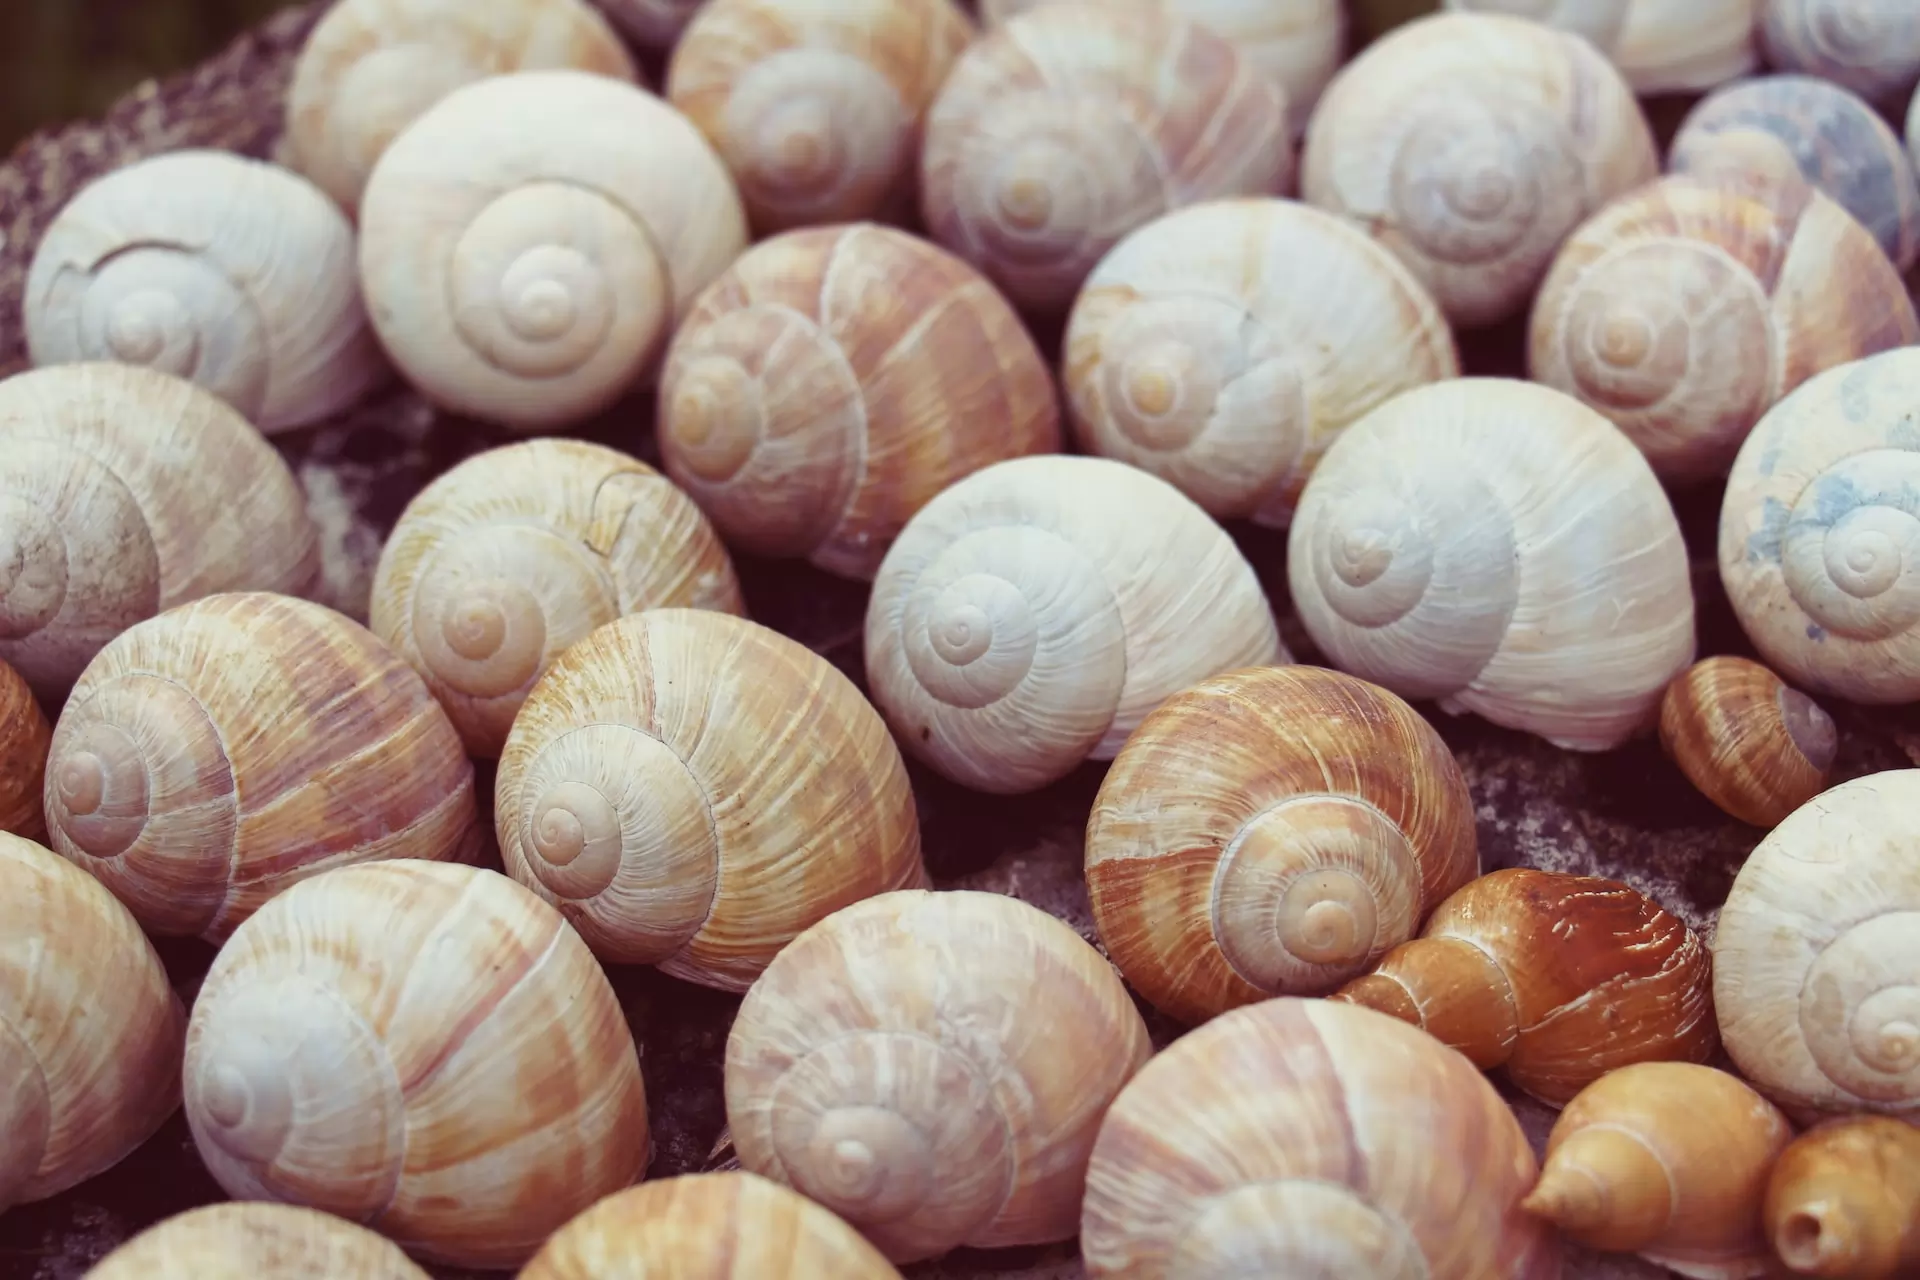 The snail and heliciculture market